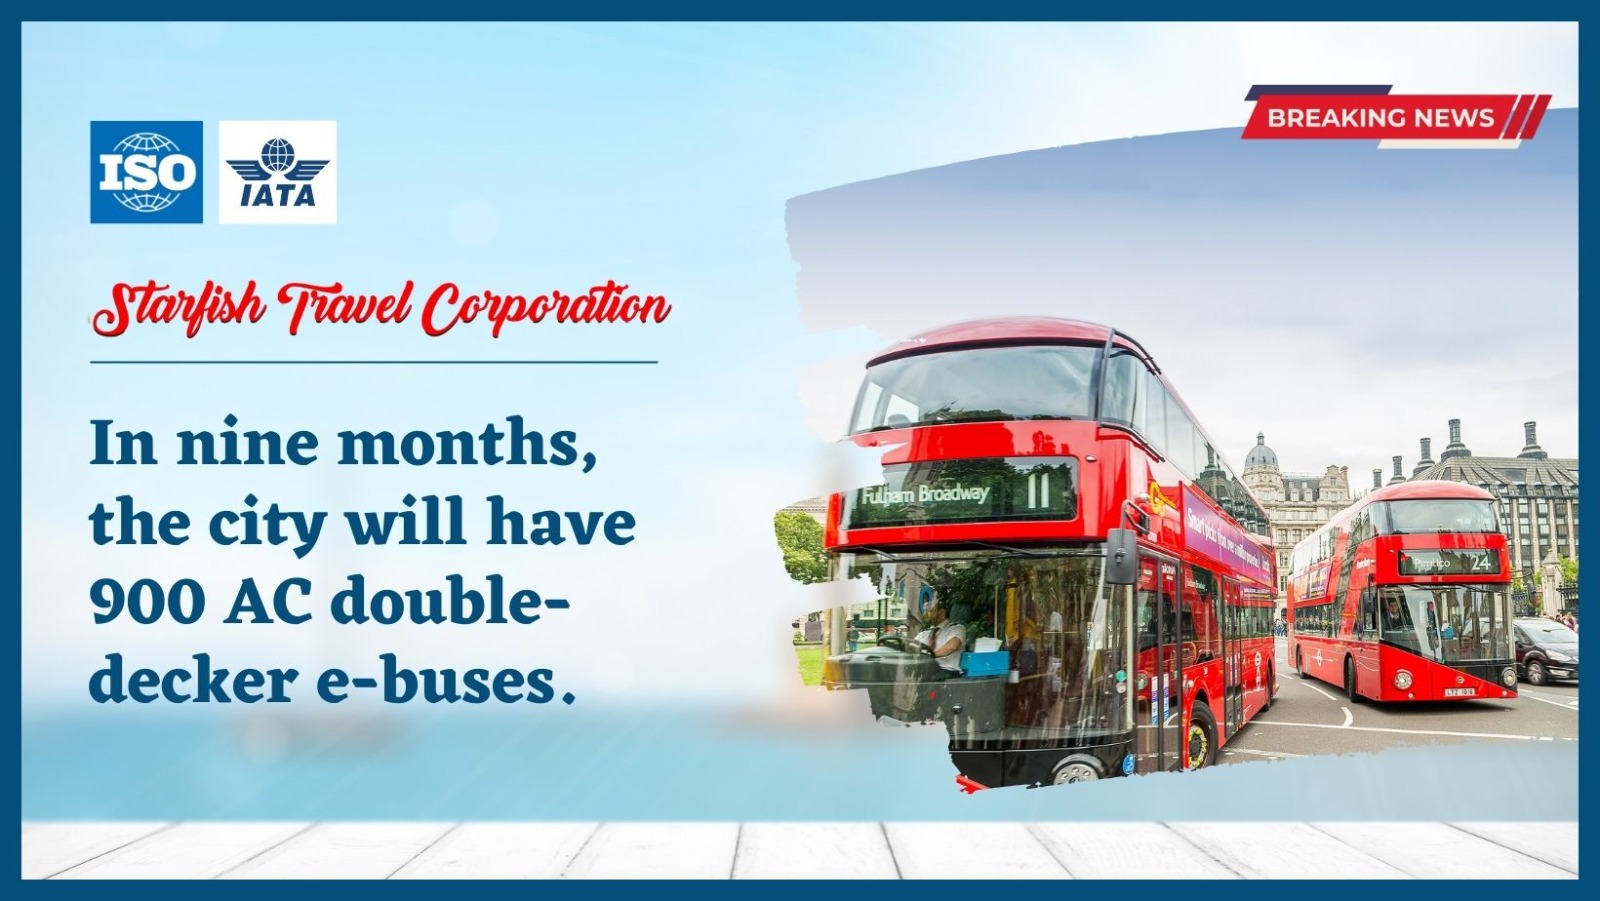 In nine months, the city will have 900 AC double-decker e-buses.